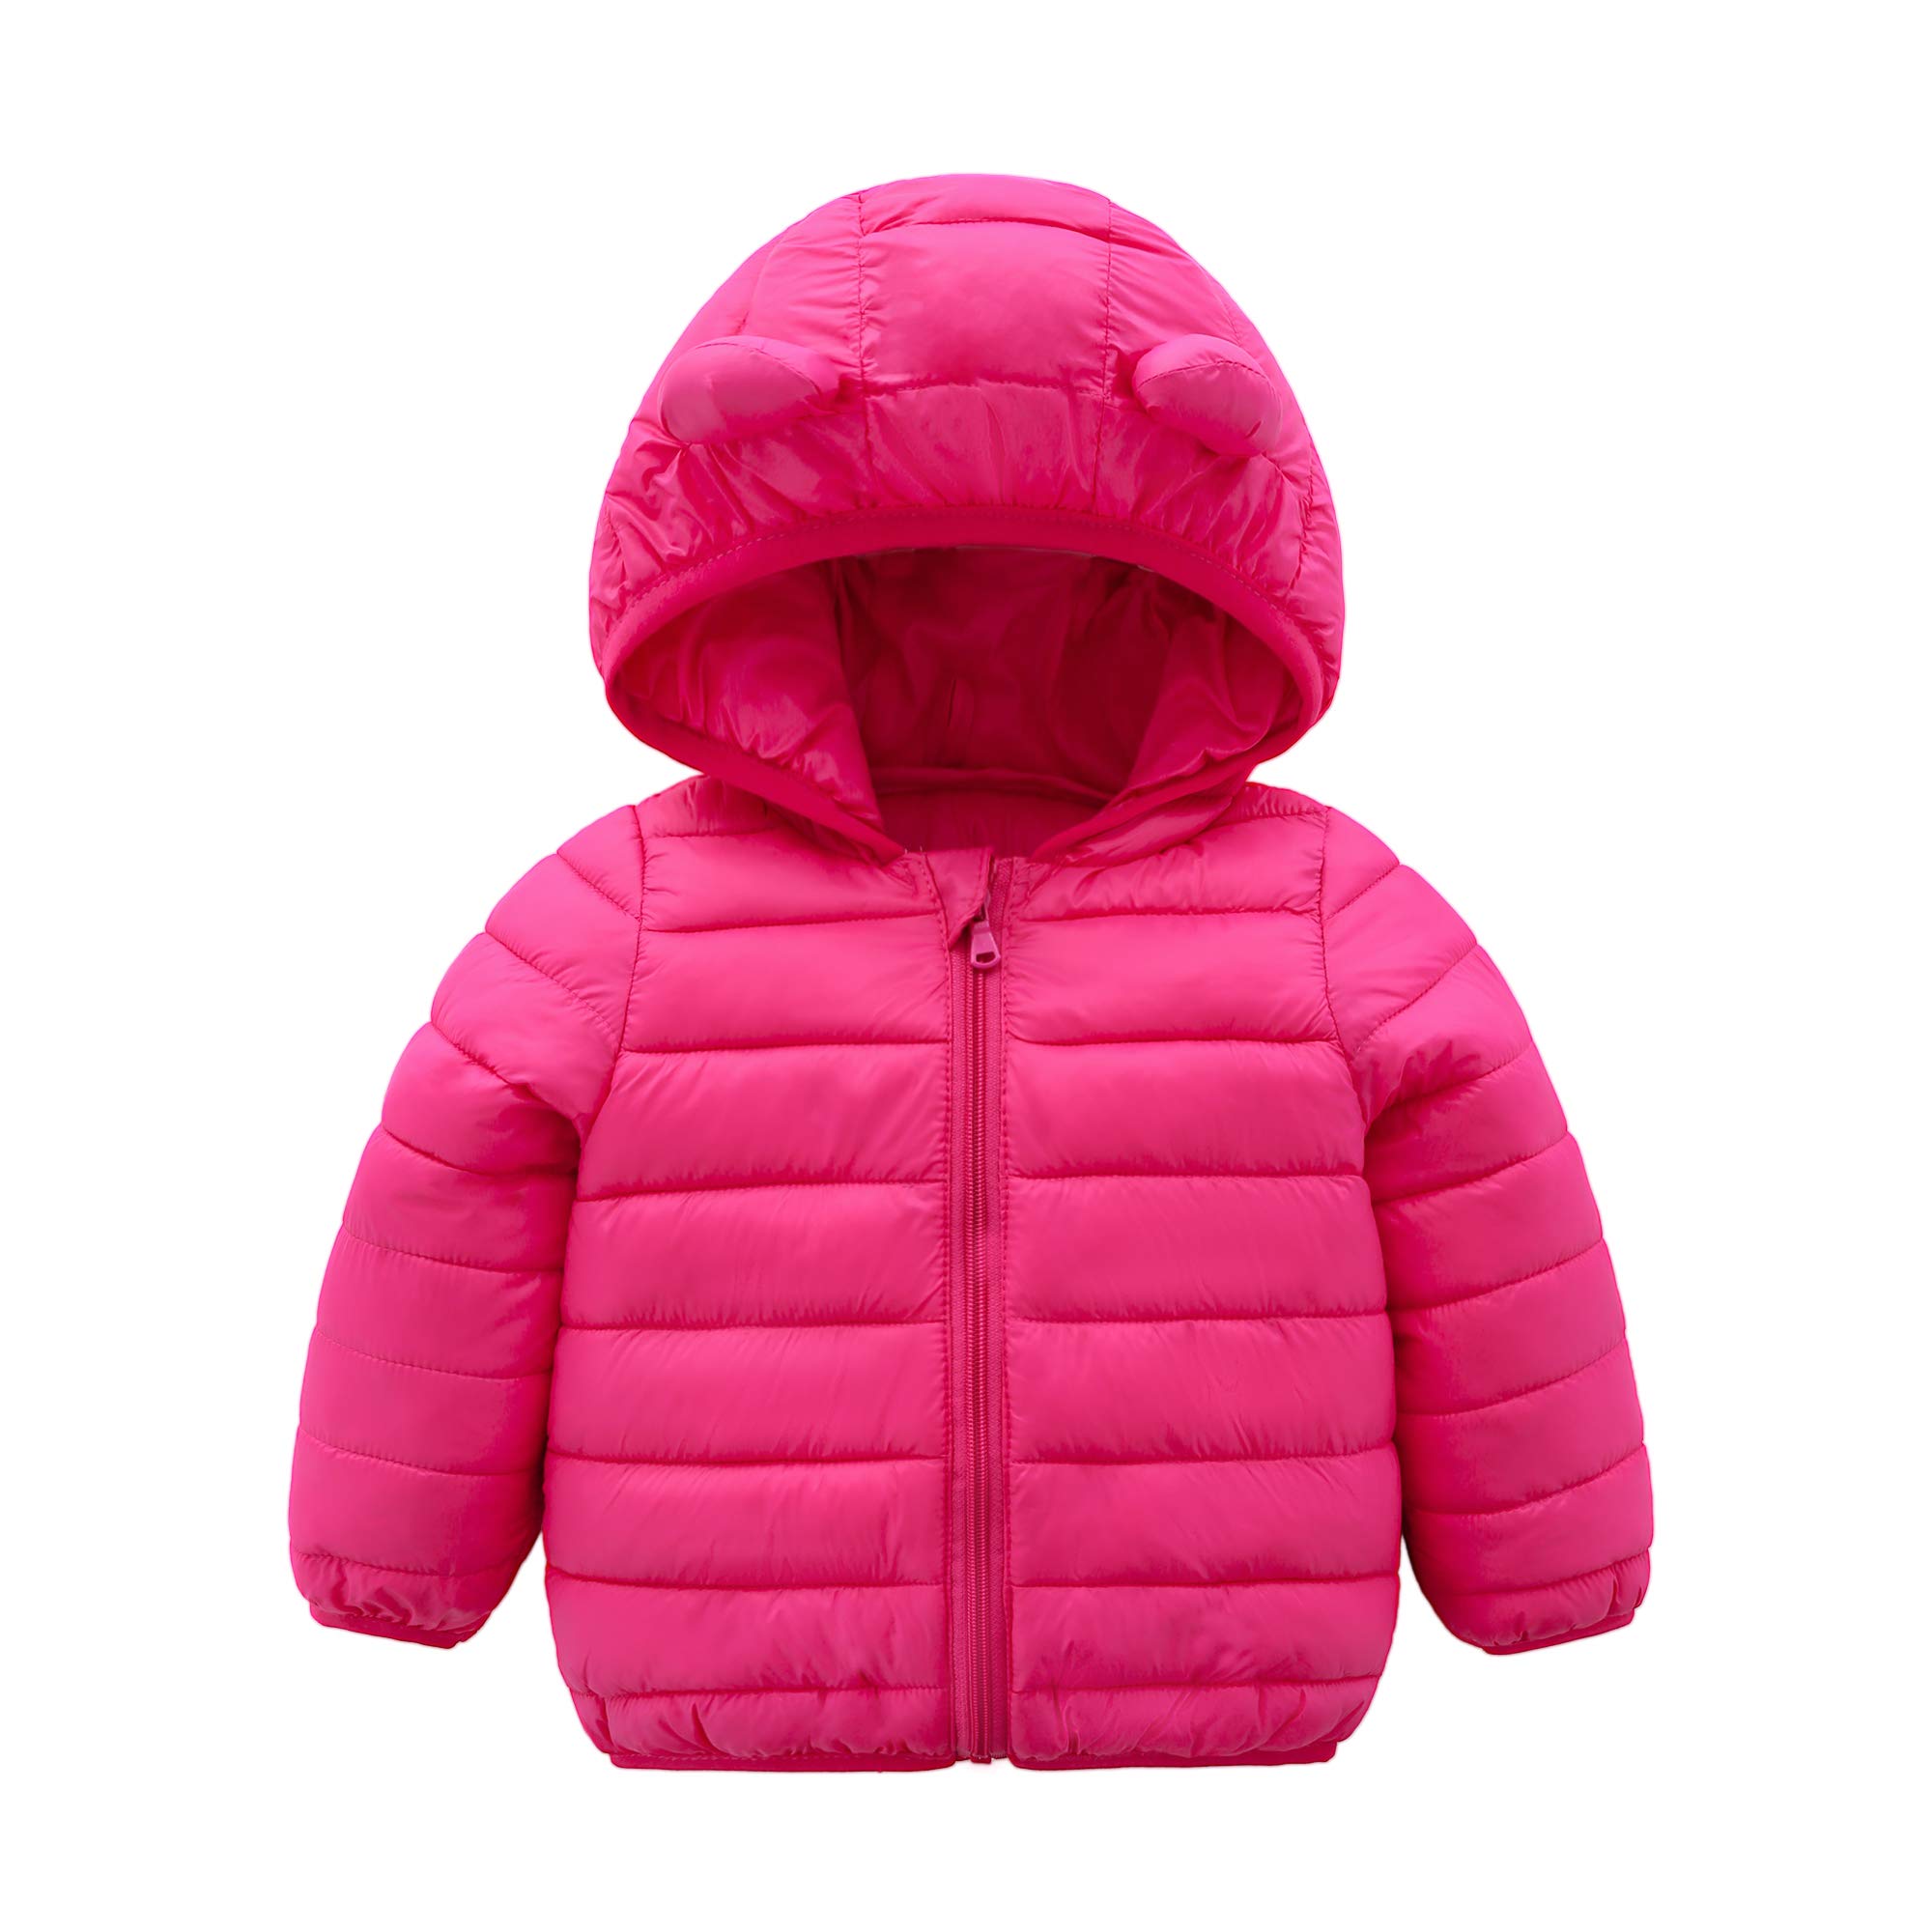 Cecorc Winter Coats For Kids With Hoods (Padded) Light Puffer Jacket For Baby Boys Girls, Infants, Toddlers (Rose, 4T)